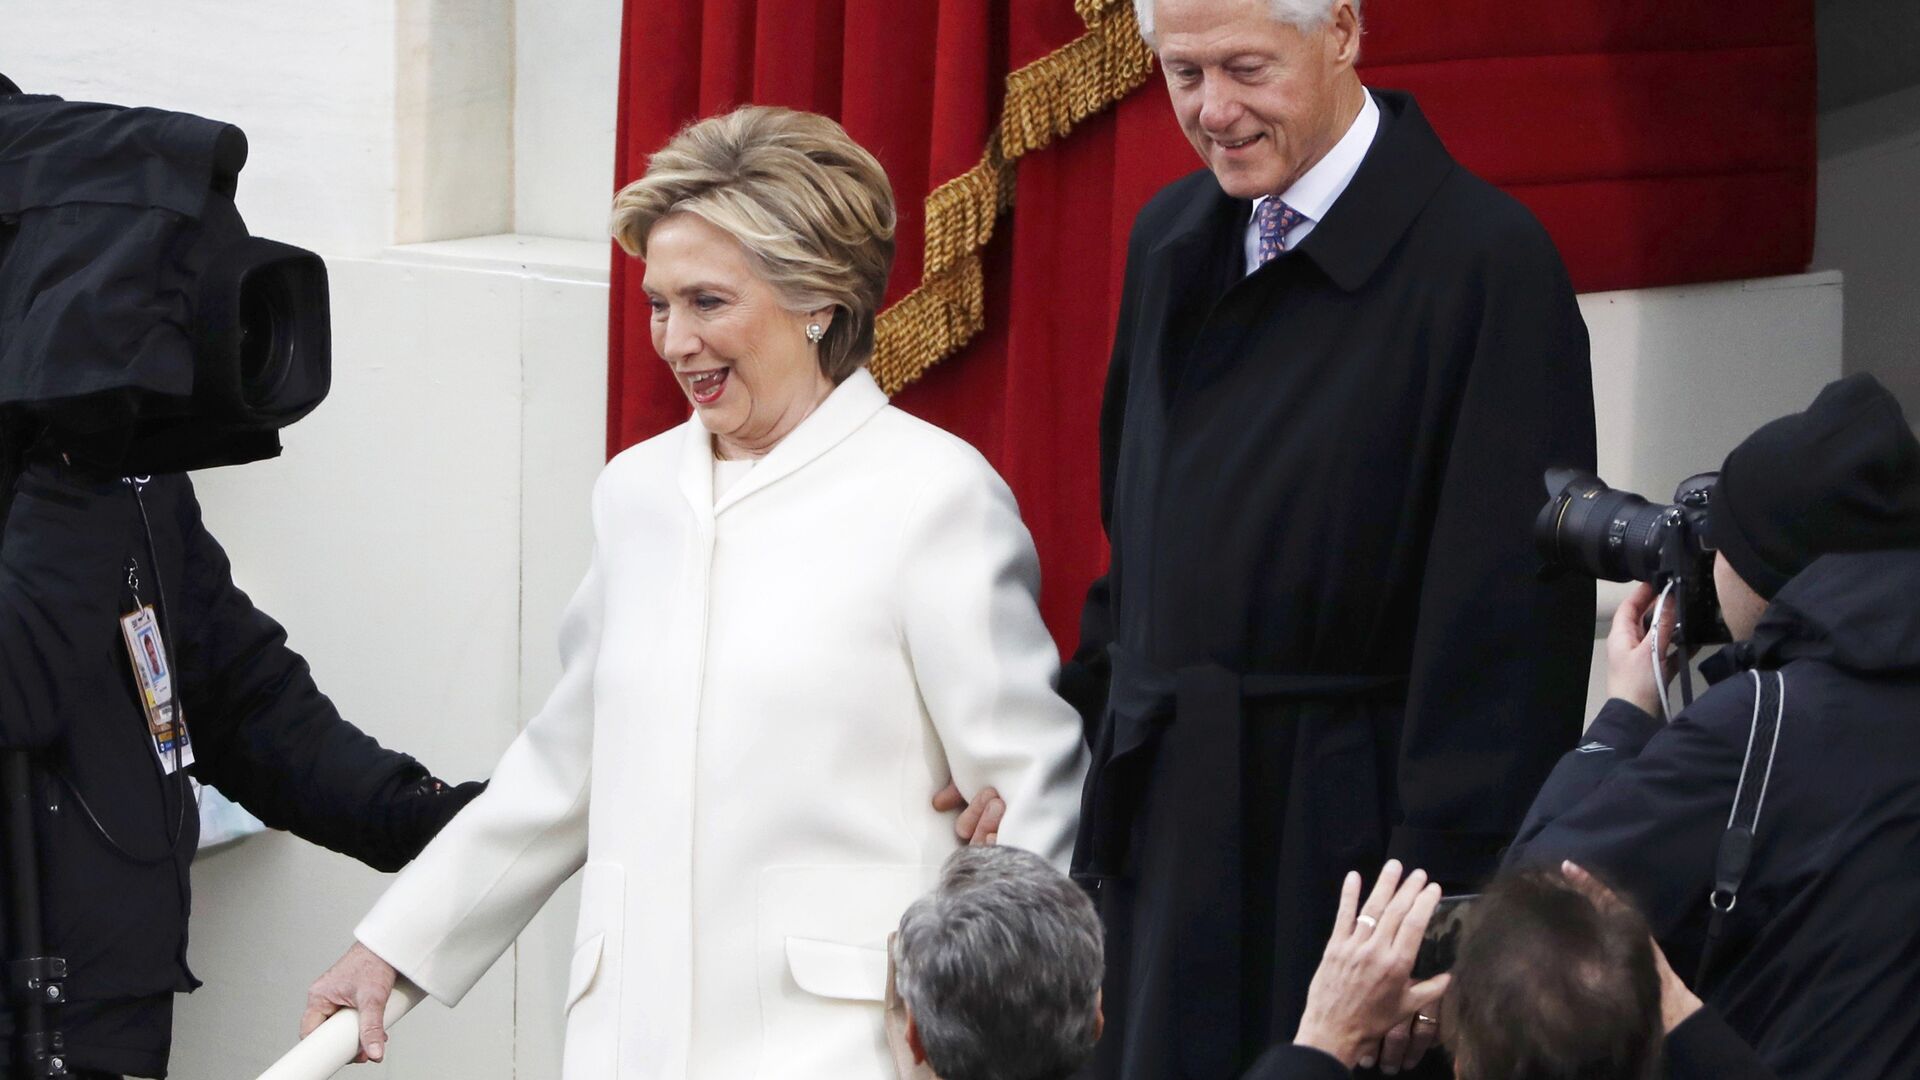 2016 Democratic presidential nominee and former Secretary of State Hillary Clinton (L) arrives with her husband former President Bill Clinton for the inauguration ceremonies swearing in Donald Trump as the 45th president of the United States on the West front of the U.S. Capitol in Washington, U.S., January 20, 2017 - Sputnik International, 1920, 11.03.2022